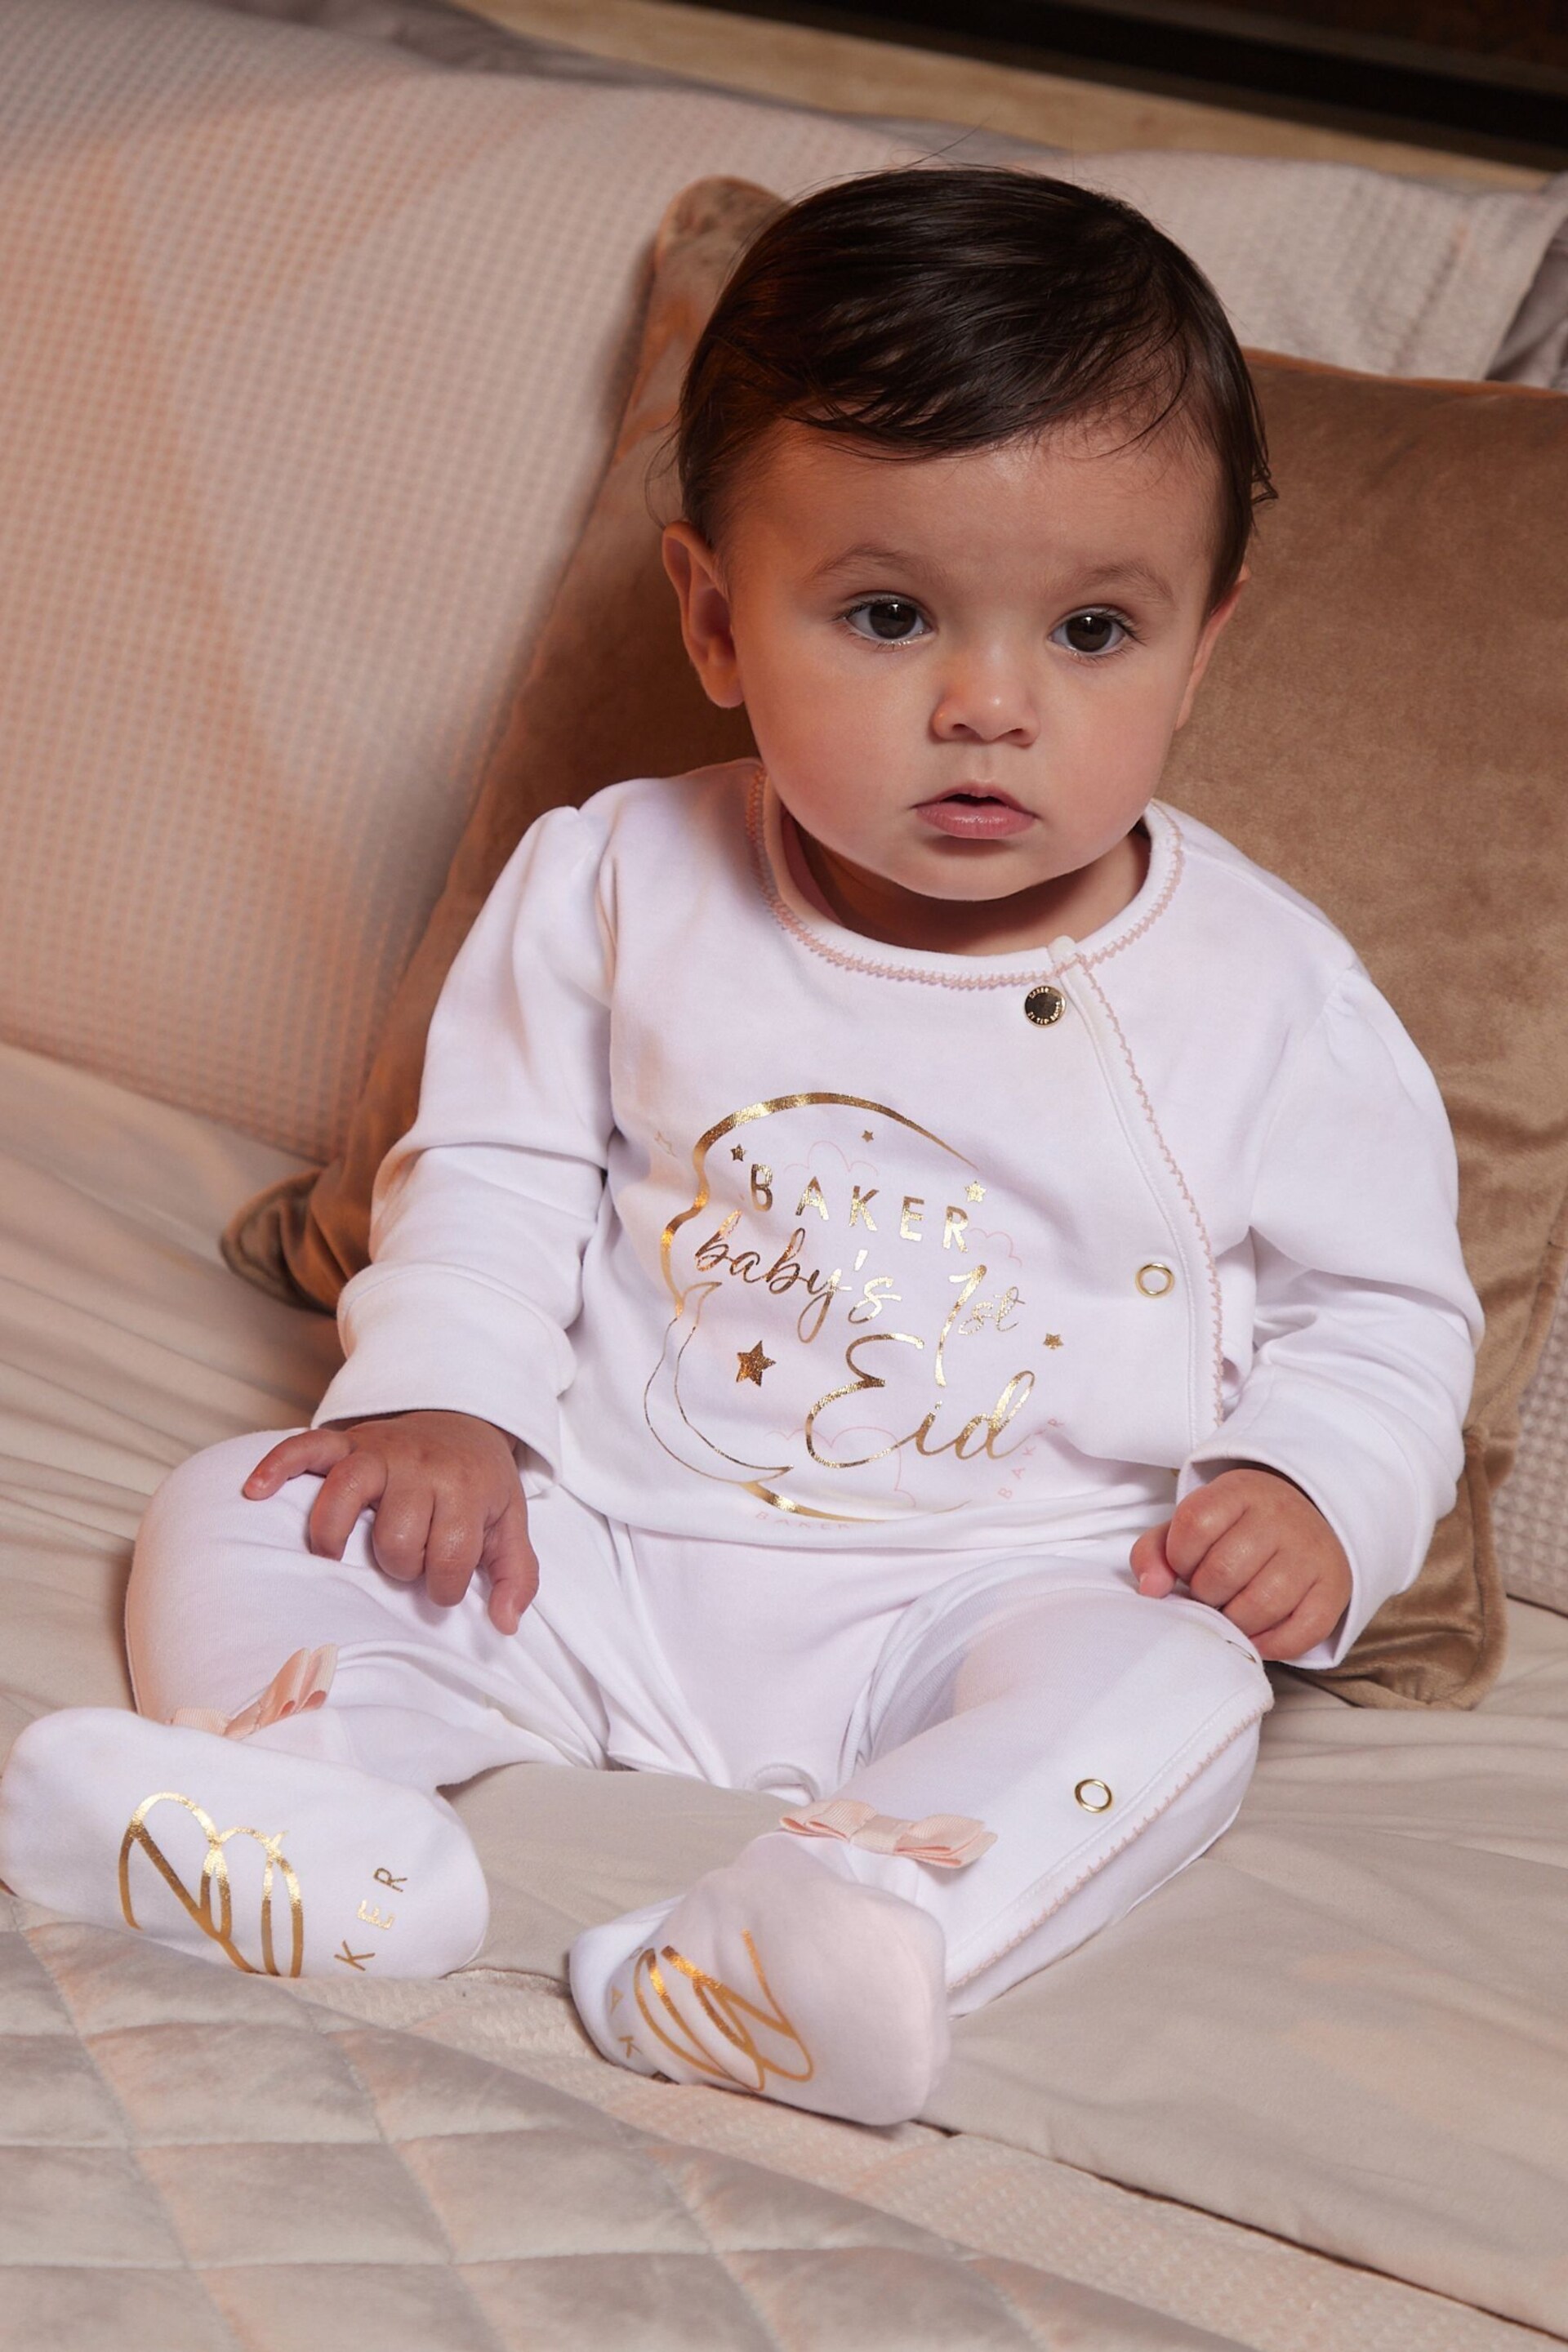 Baker by Ted Baker Babys First Eid Cotton White Sleepsuit - Image 1 of 7